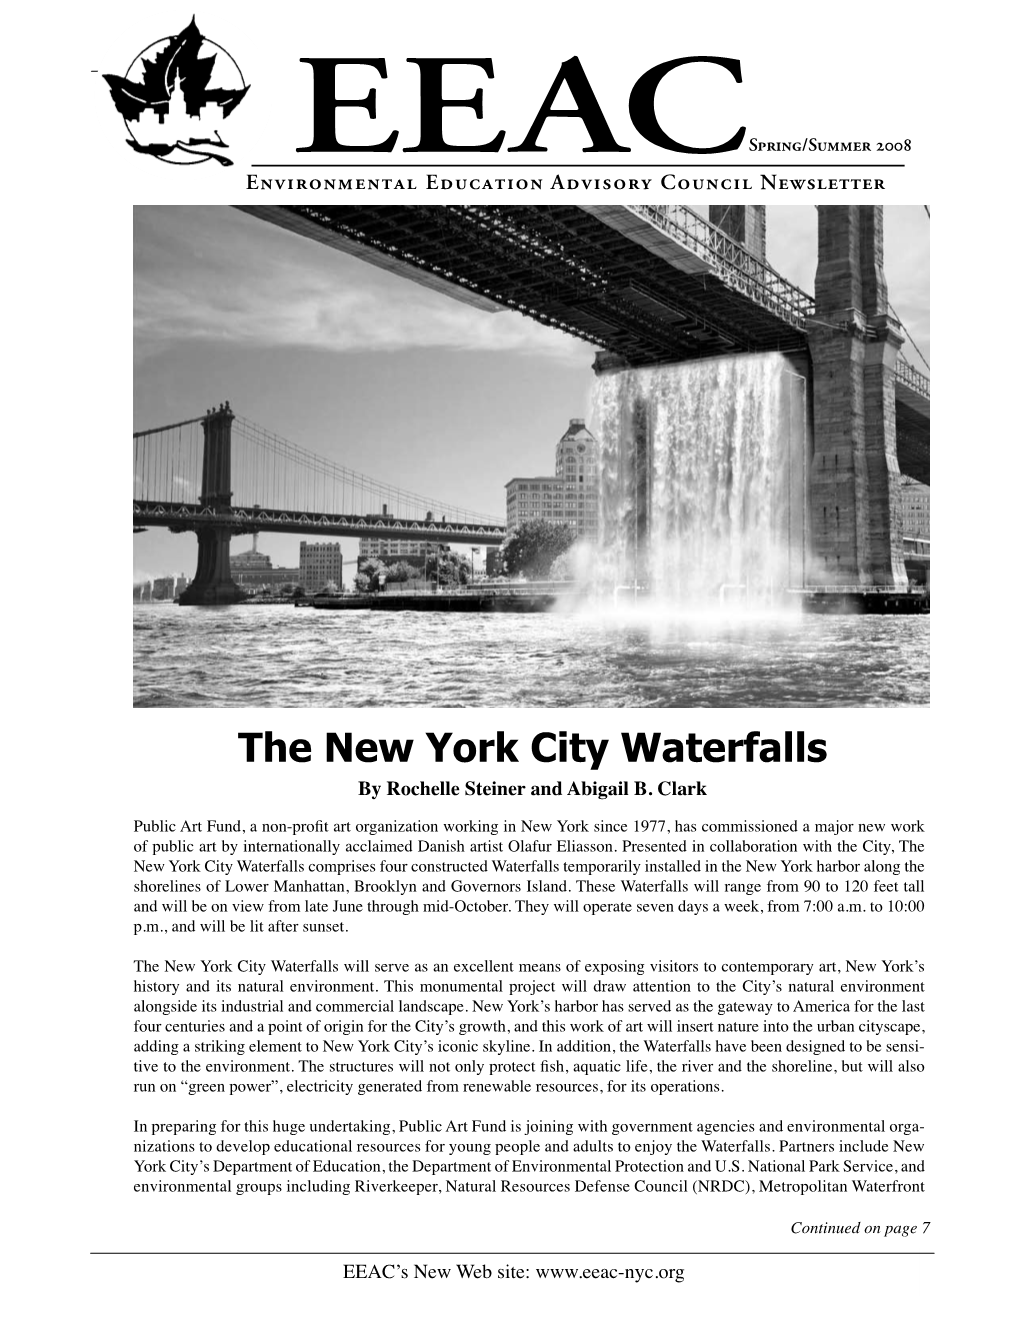 The New York City Waterfalls by Rochelle Steiner and Abigail B